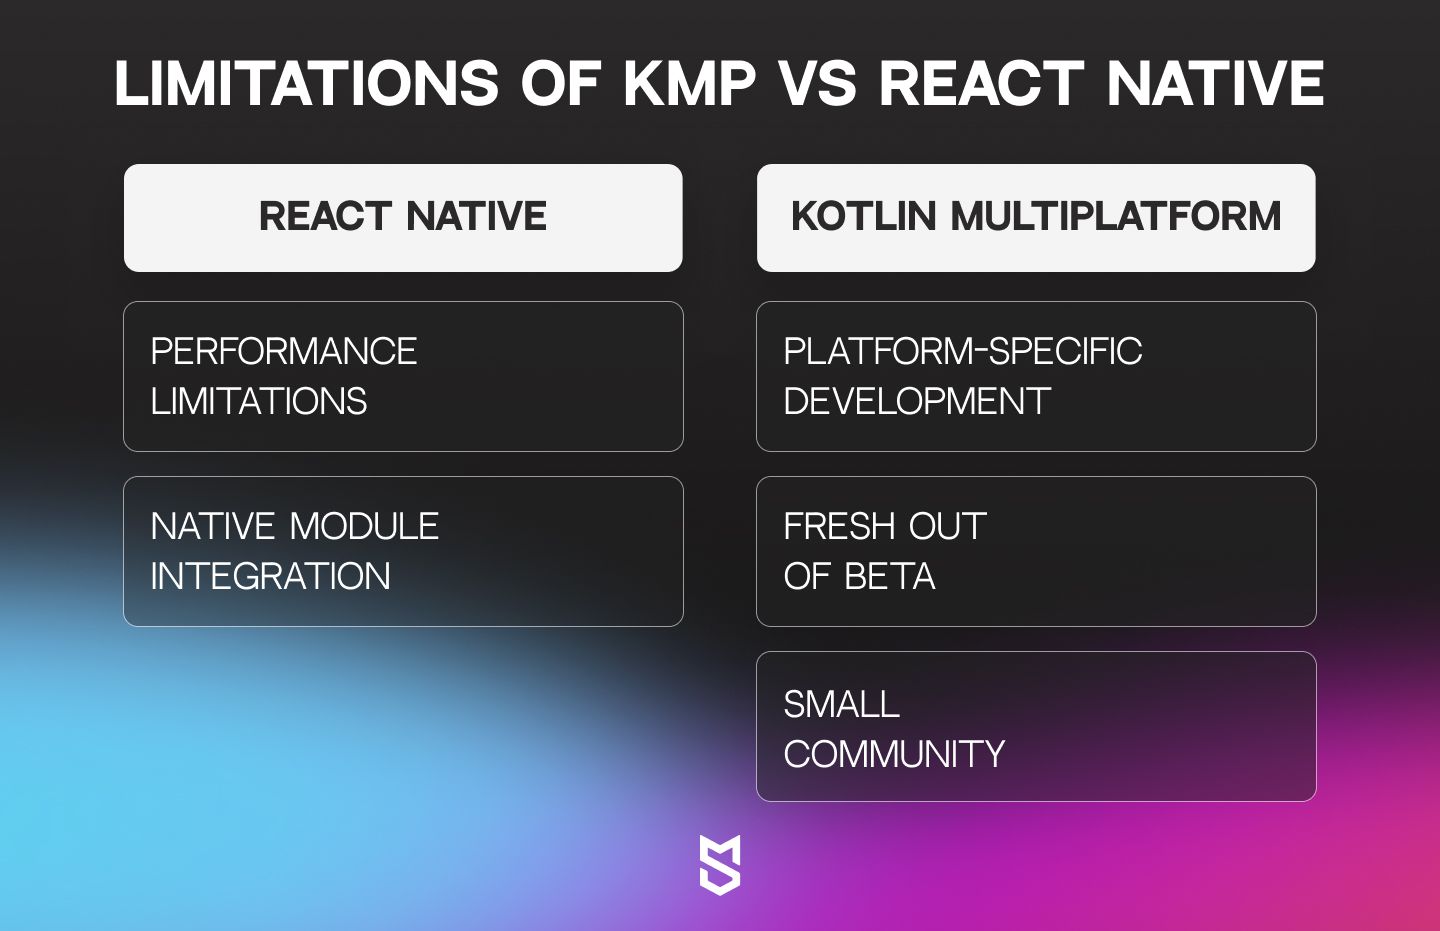 KMP vs React Native challenges and limiations